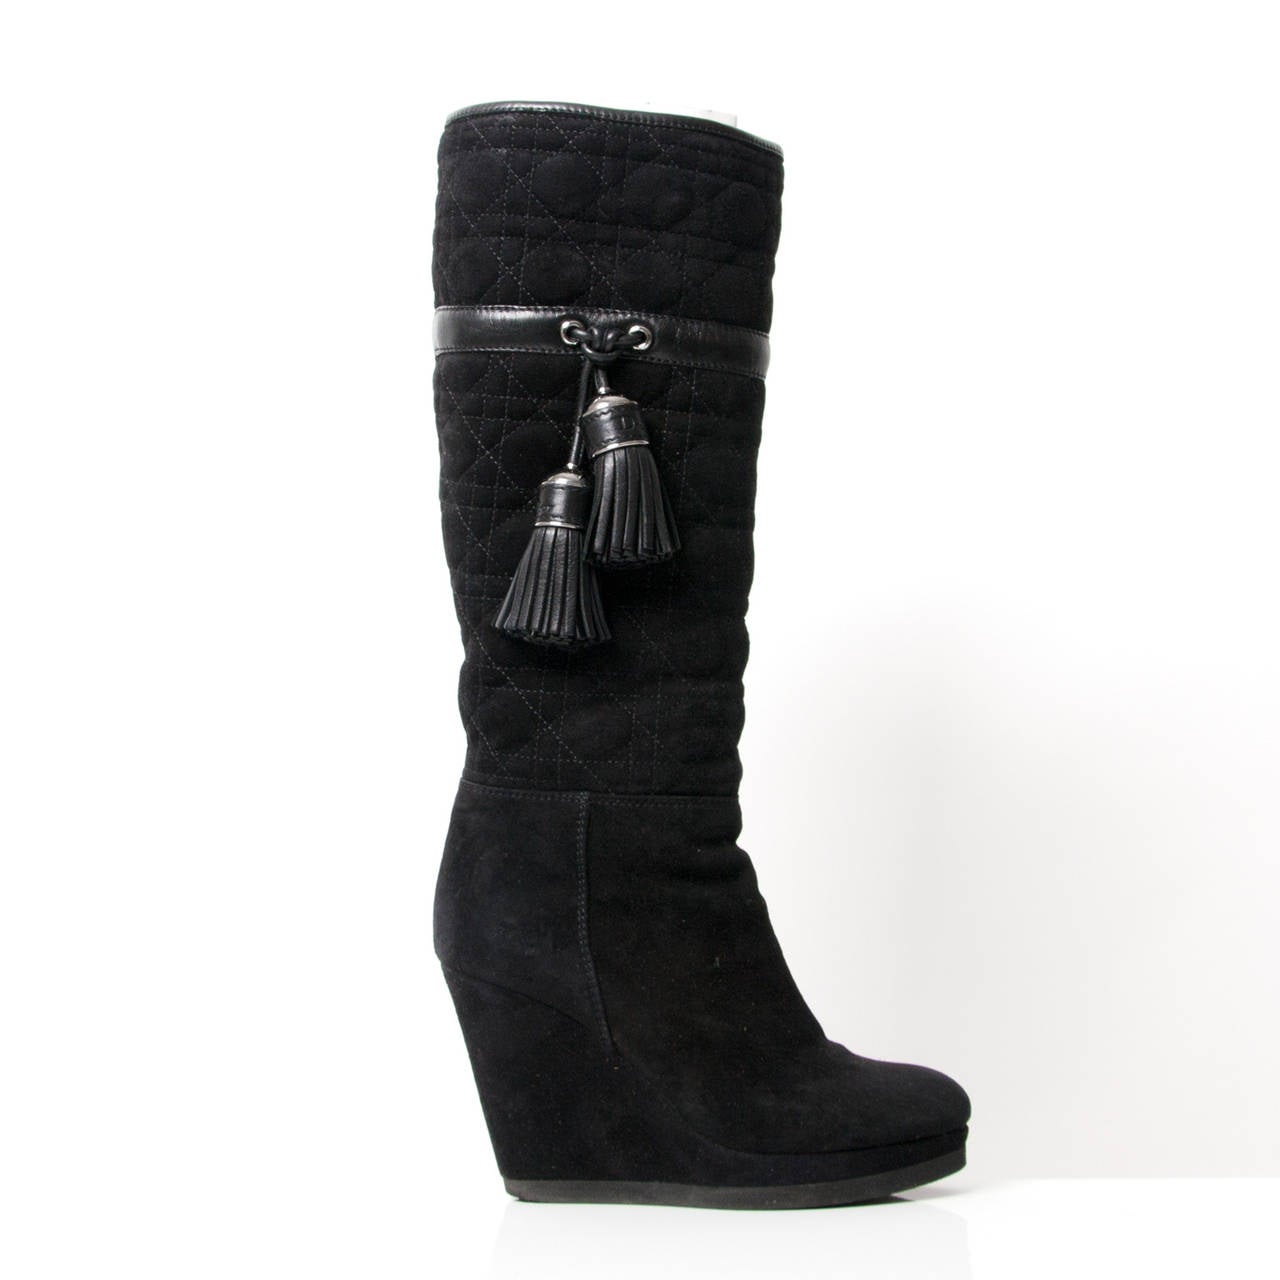 There is no better way to dress up your feet than with a fabulous pair of Christian Dior boots. 
Color: Black quilted cannage suede upper. 
Dyed shearling lining.
Silvertone capped leather pom tassels down side.